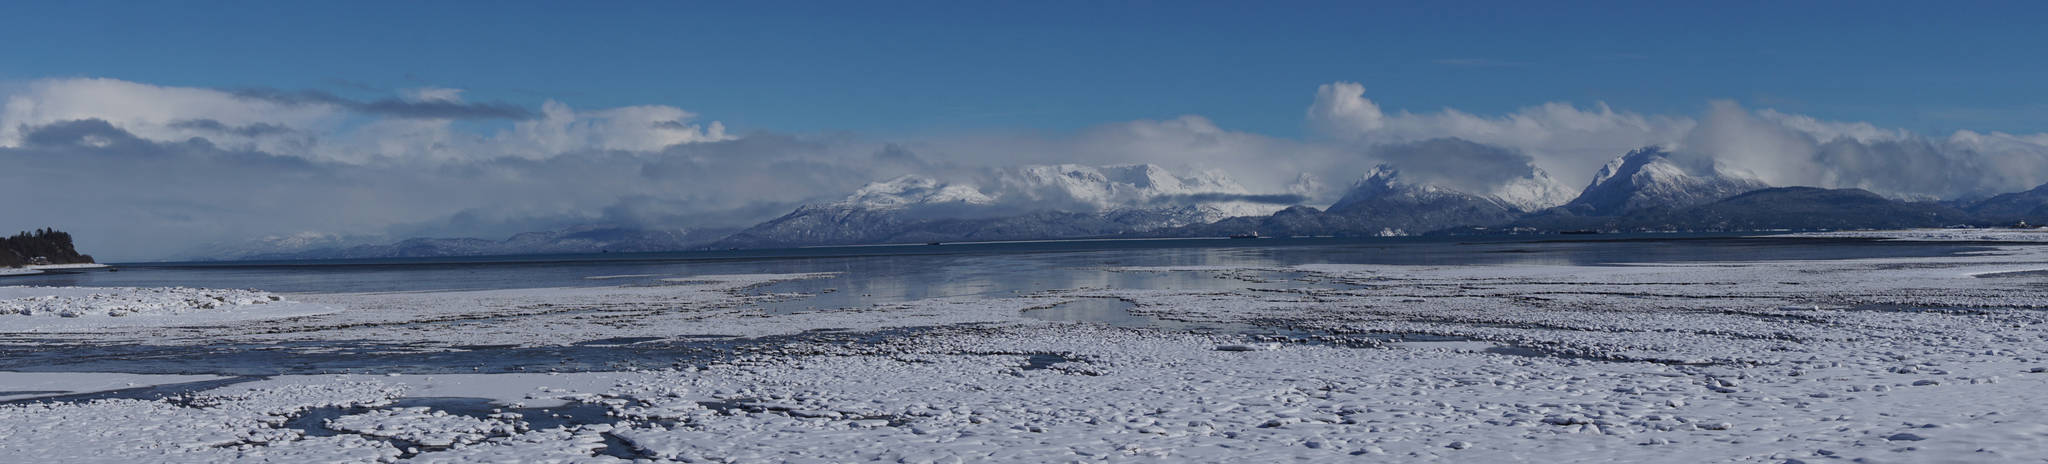 Snowfall over the weekend covered ice floes on Mud Bay in this panoramic view of the Kenai Mountains and the Spit on Saturday, March 10, 2018 in Homer, Alaska. (Photo by Michael Armstrong, Homer News)